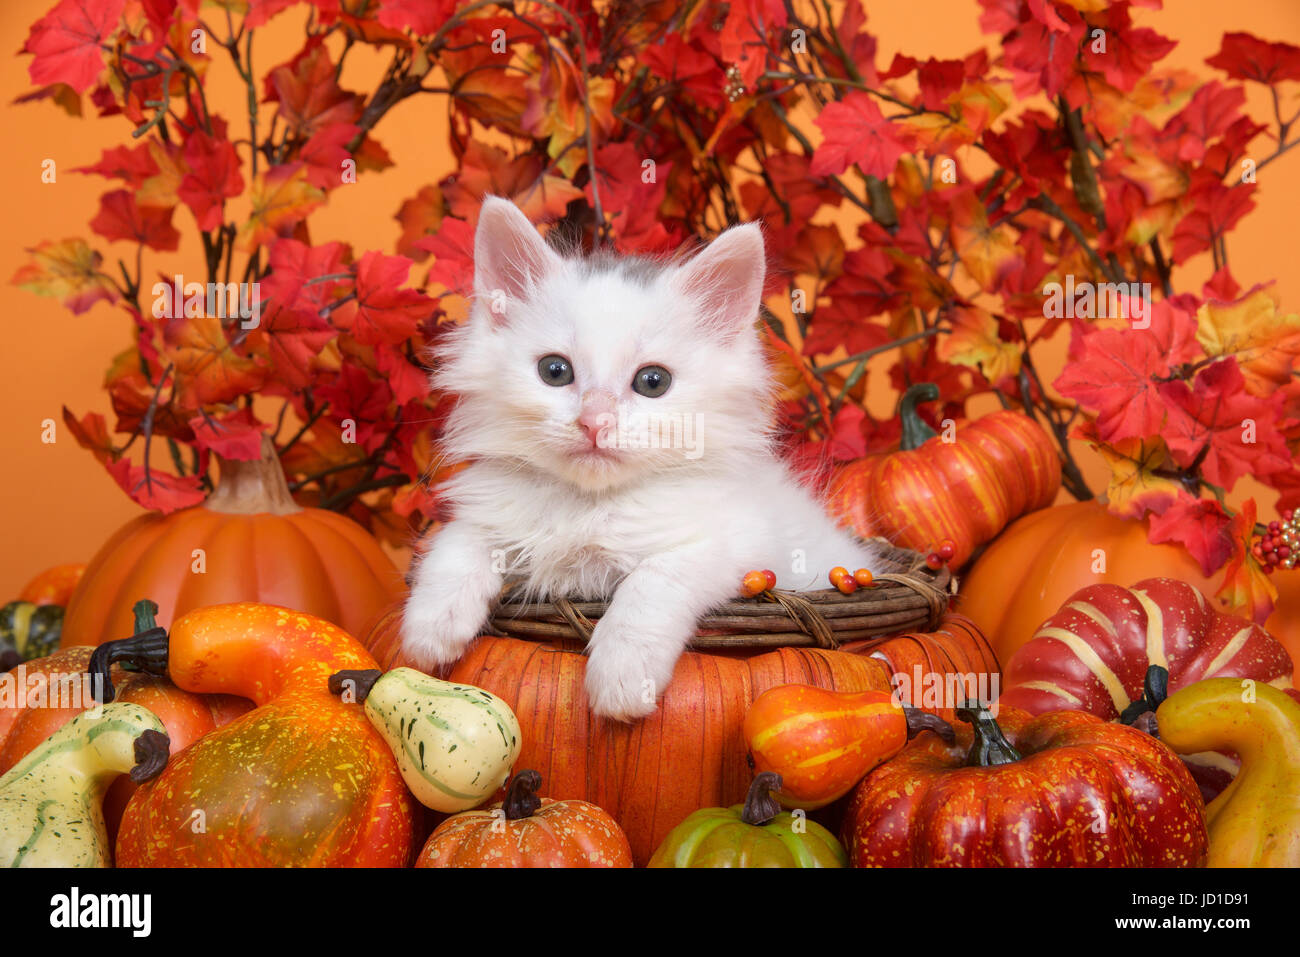 Small white kitten laying in an orange pumpkin shaped basket surrounded by gourds pumpkins and squash with fall leaves and orange background. Fun fall Stock Photo